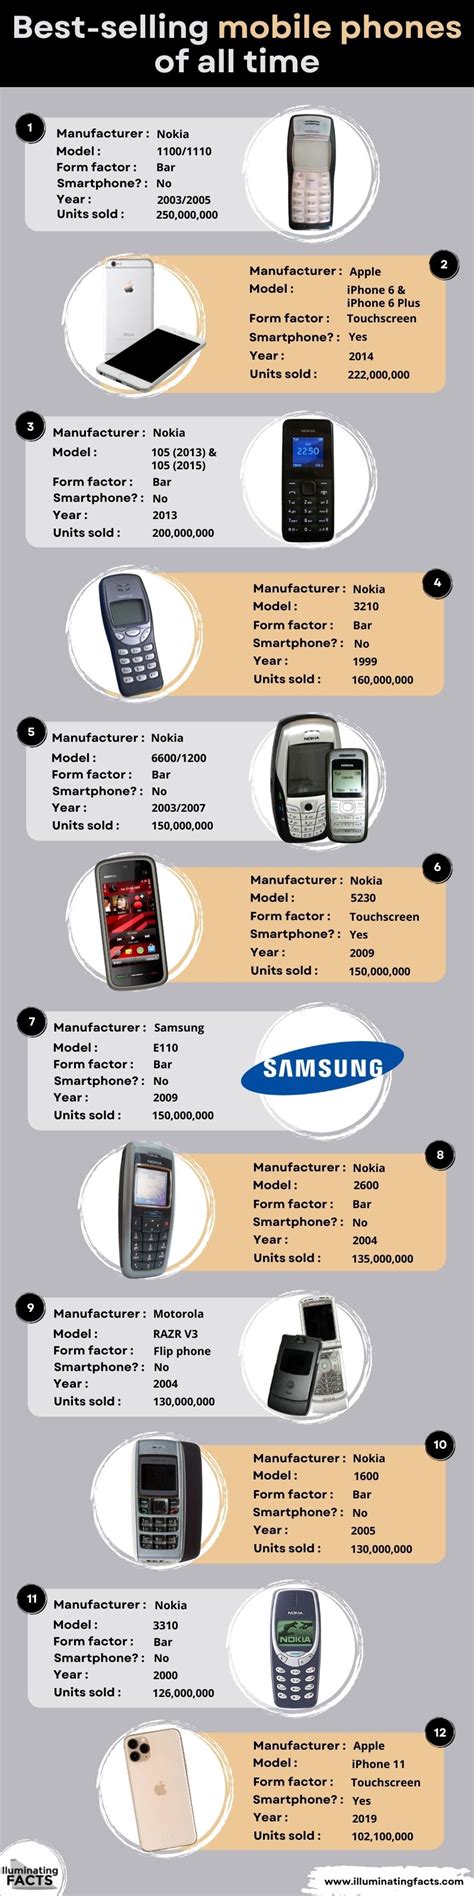 Best Selling Mobile Phones Of All Time Infographic Illuminating Facts